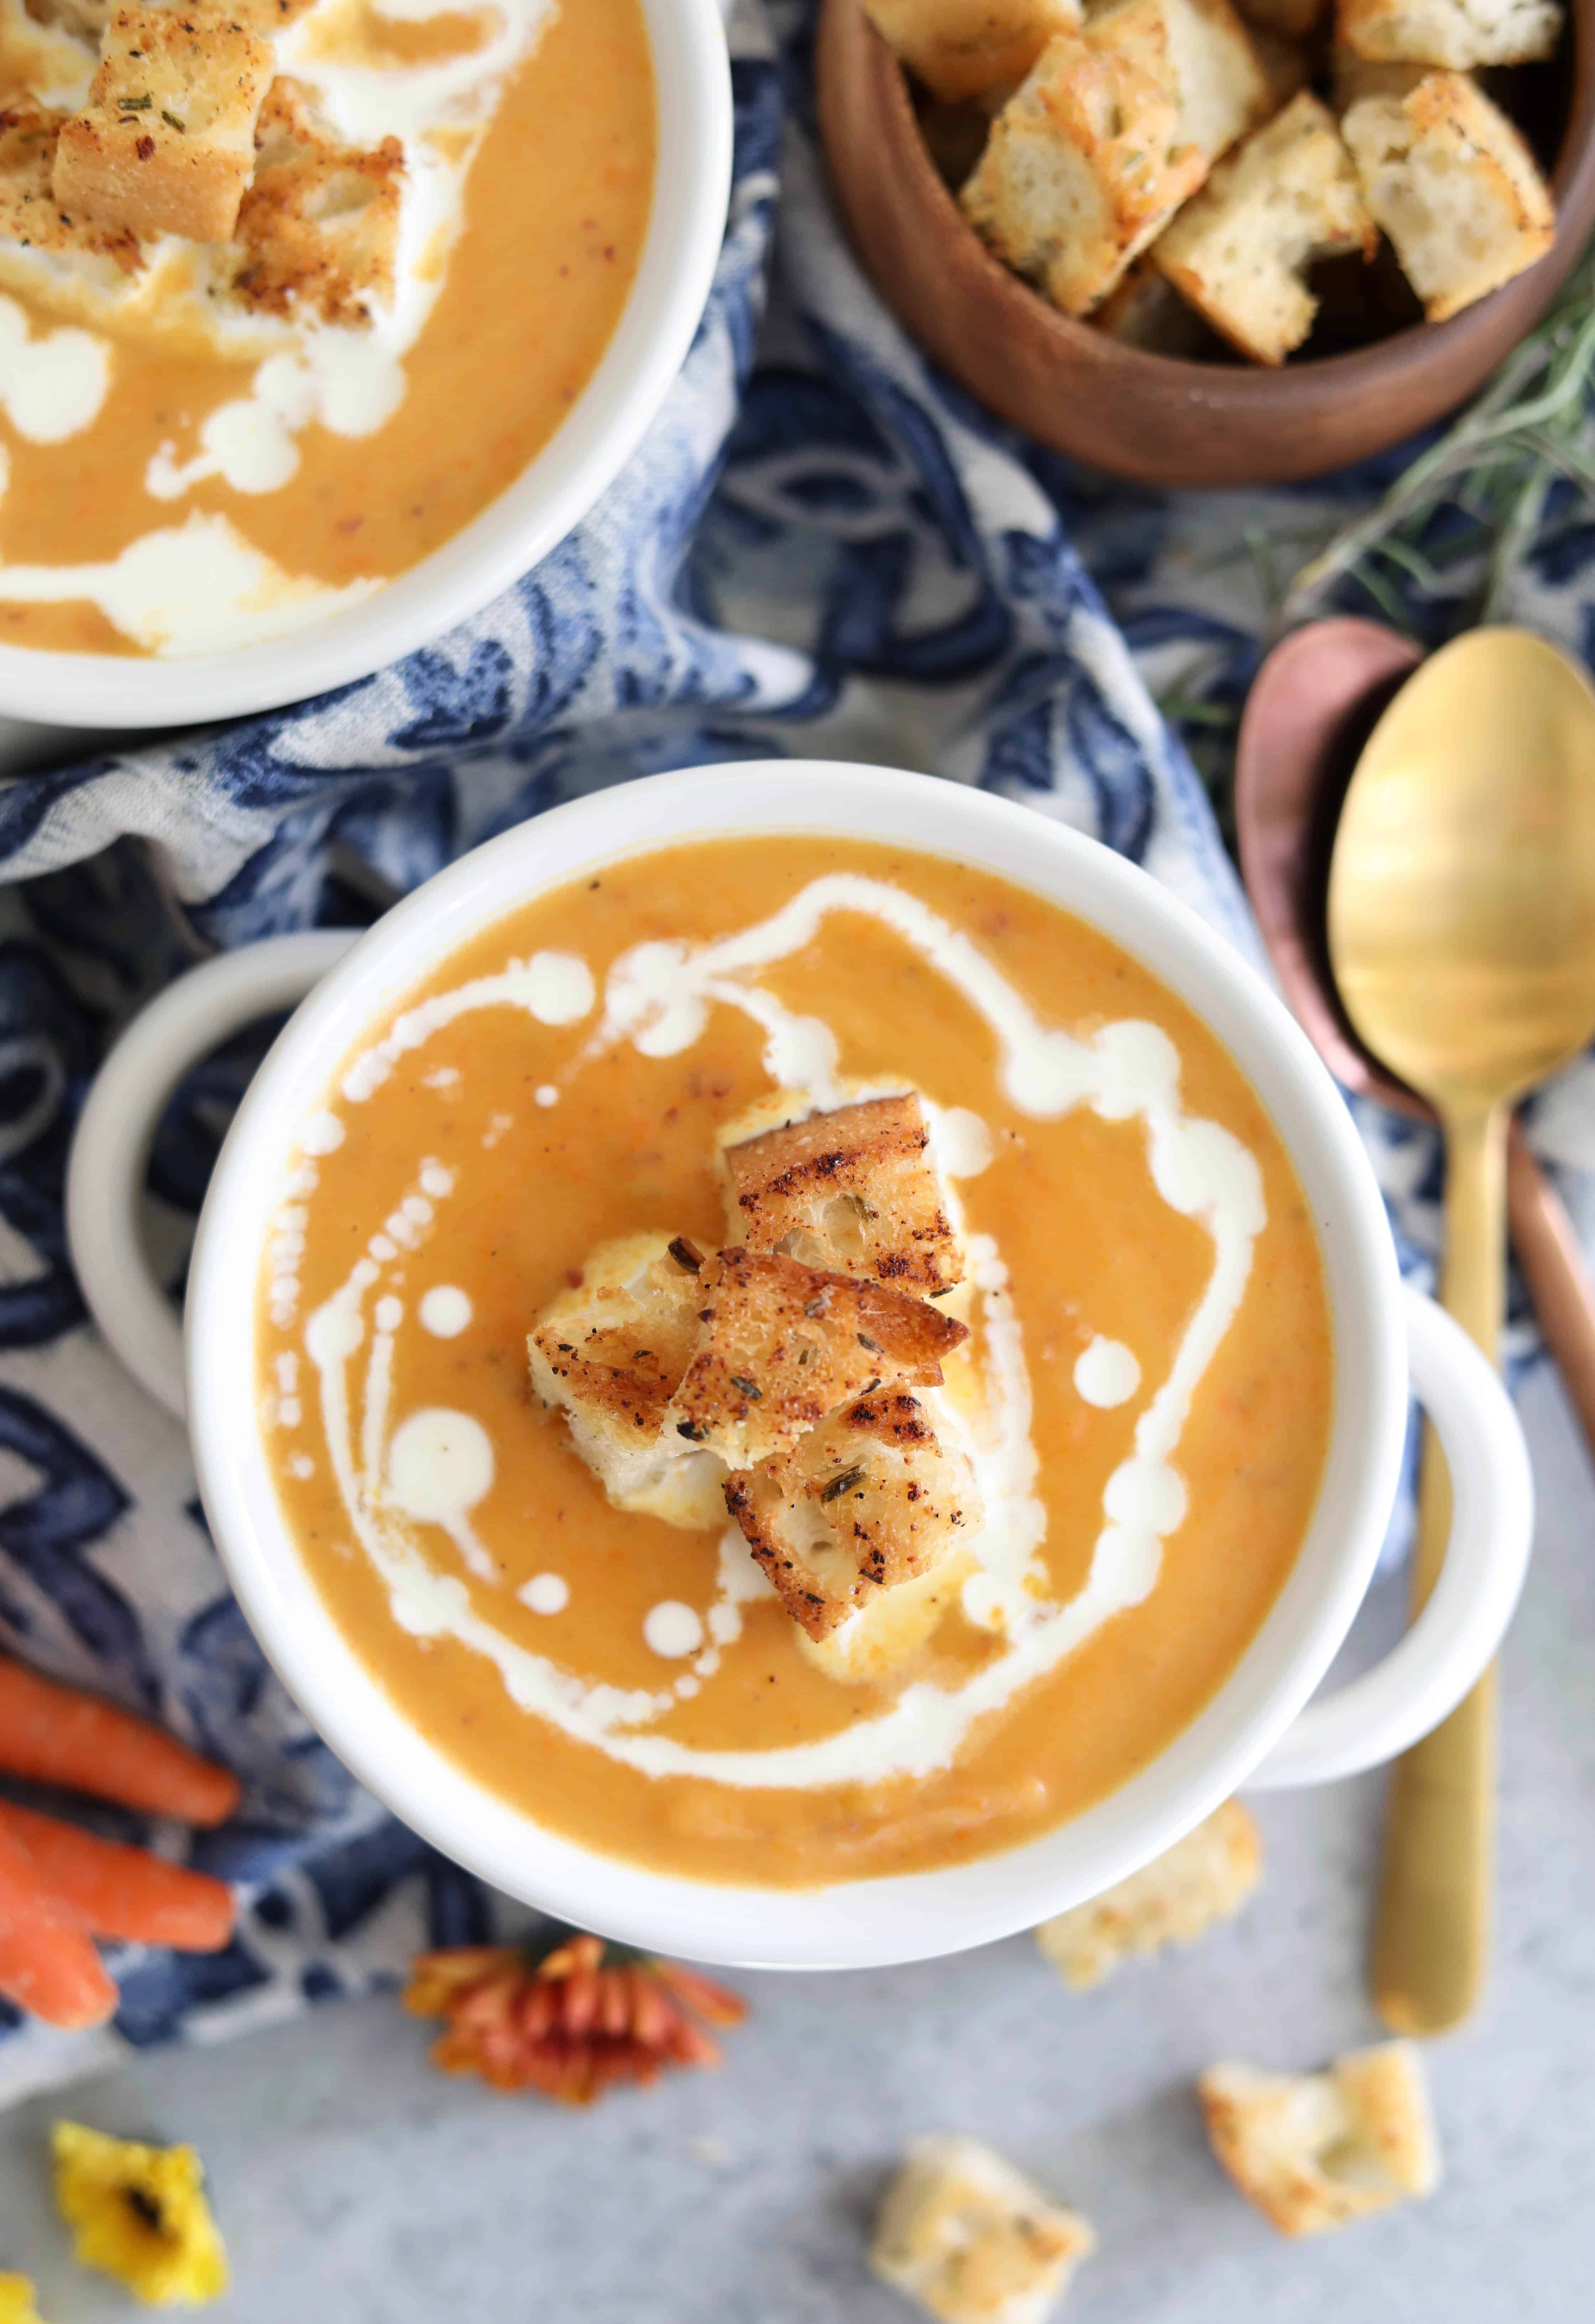 Carrot and Potato Soup with Rosemary Garlic Croutons